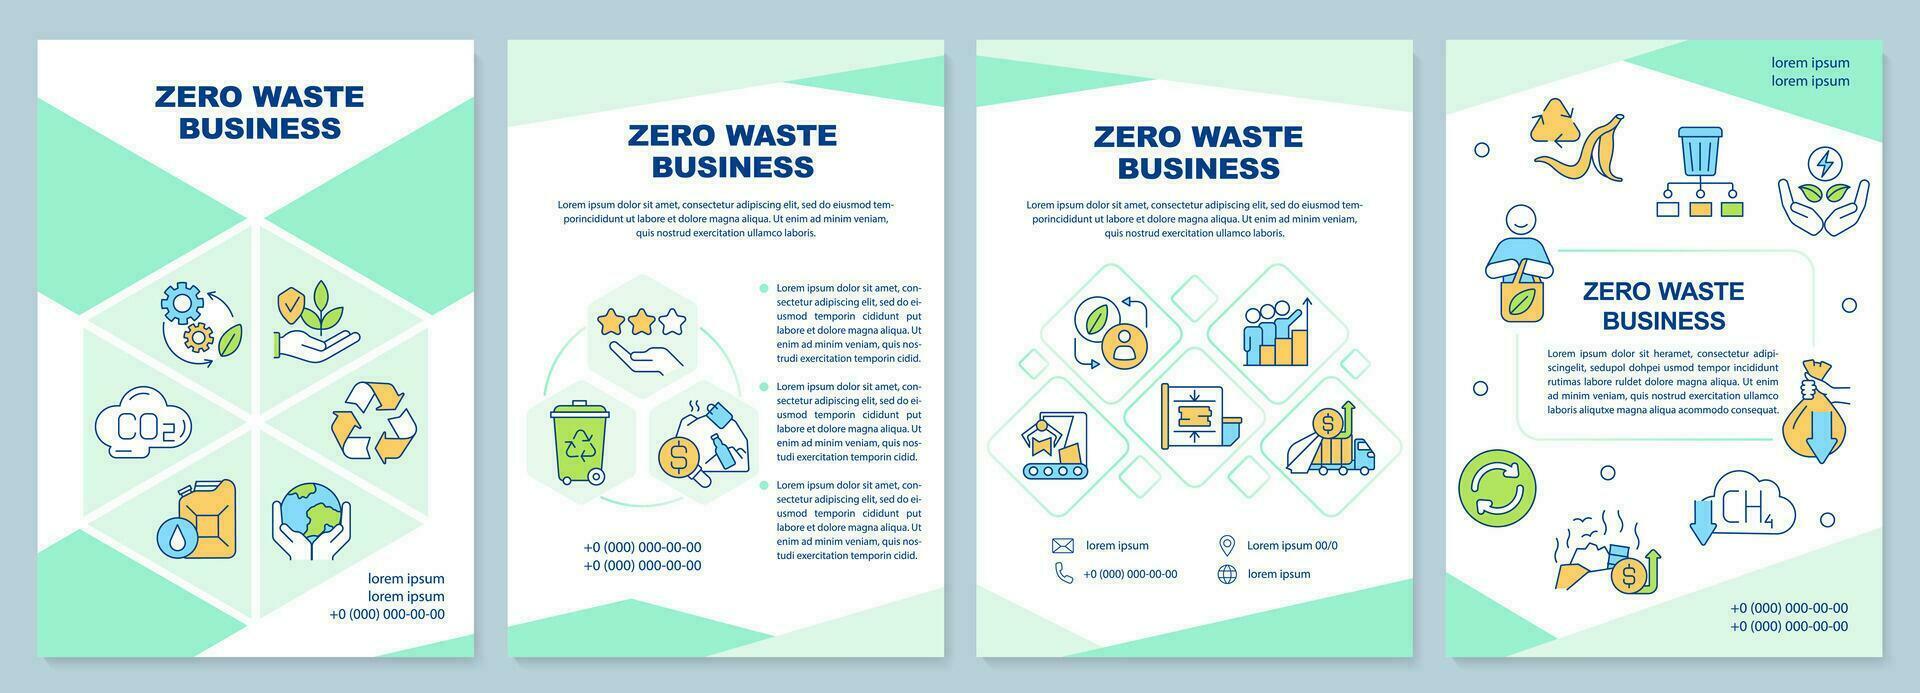 Zero waste business mint brochure template. Sustainability. Leaflet design with linear icons. Editable 4 vector layouts for presentation, annual reports